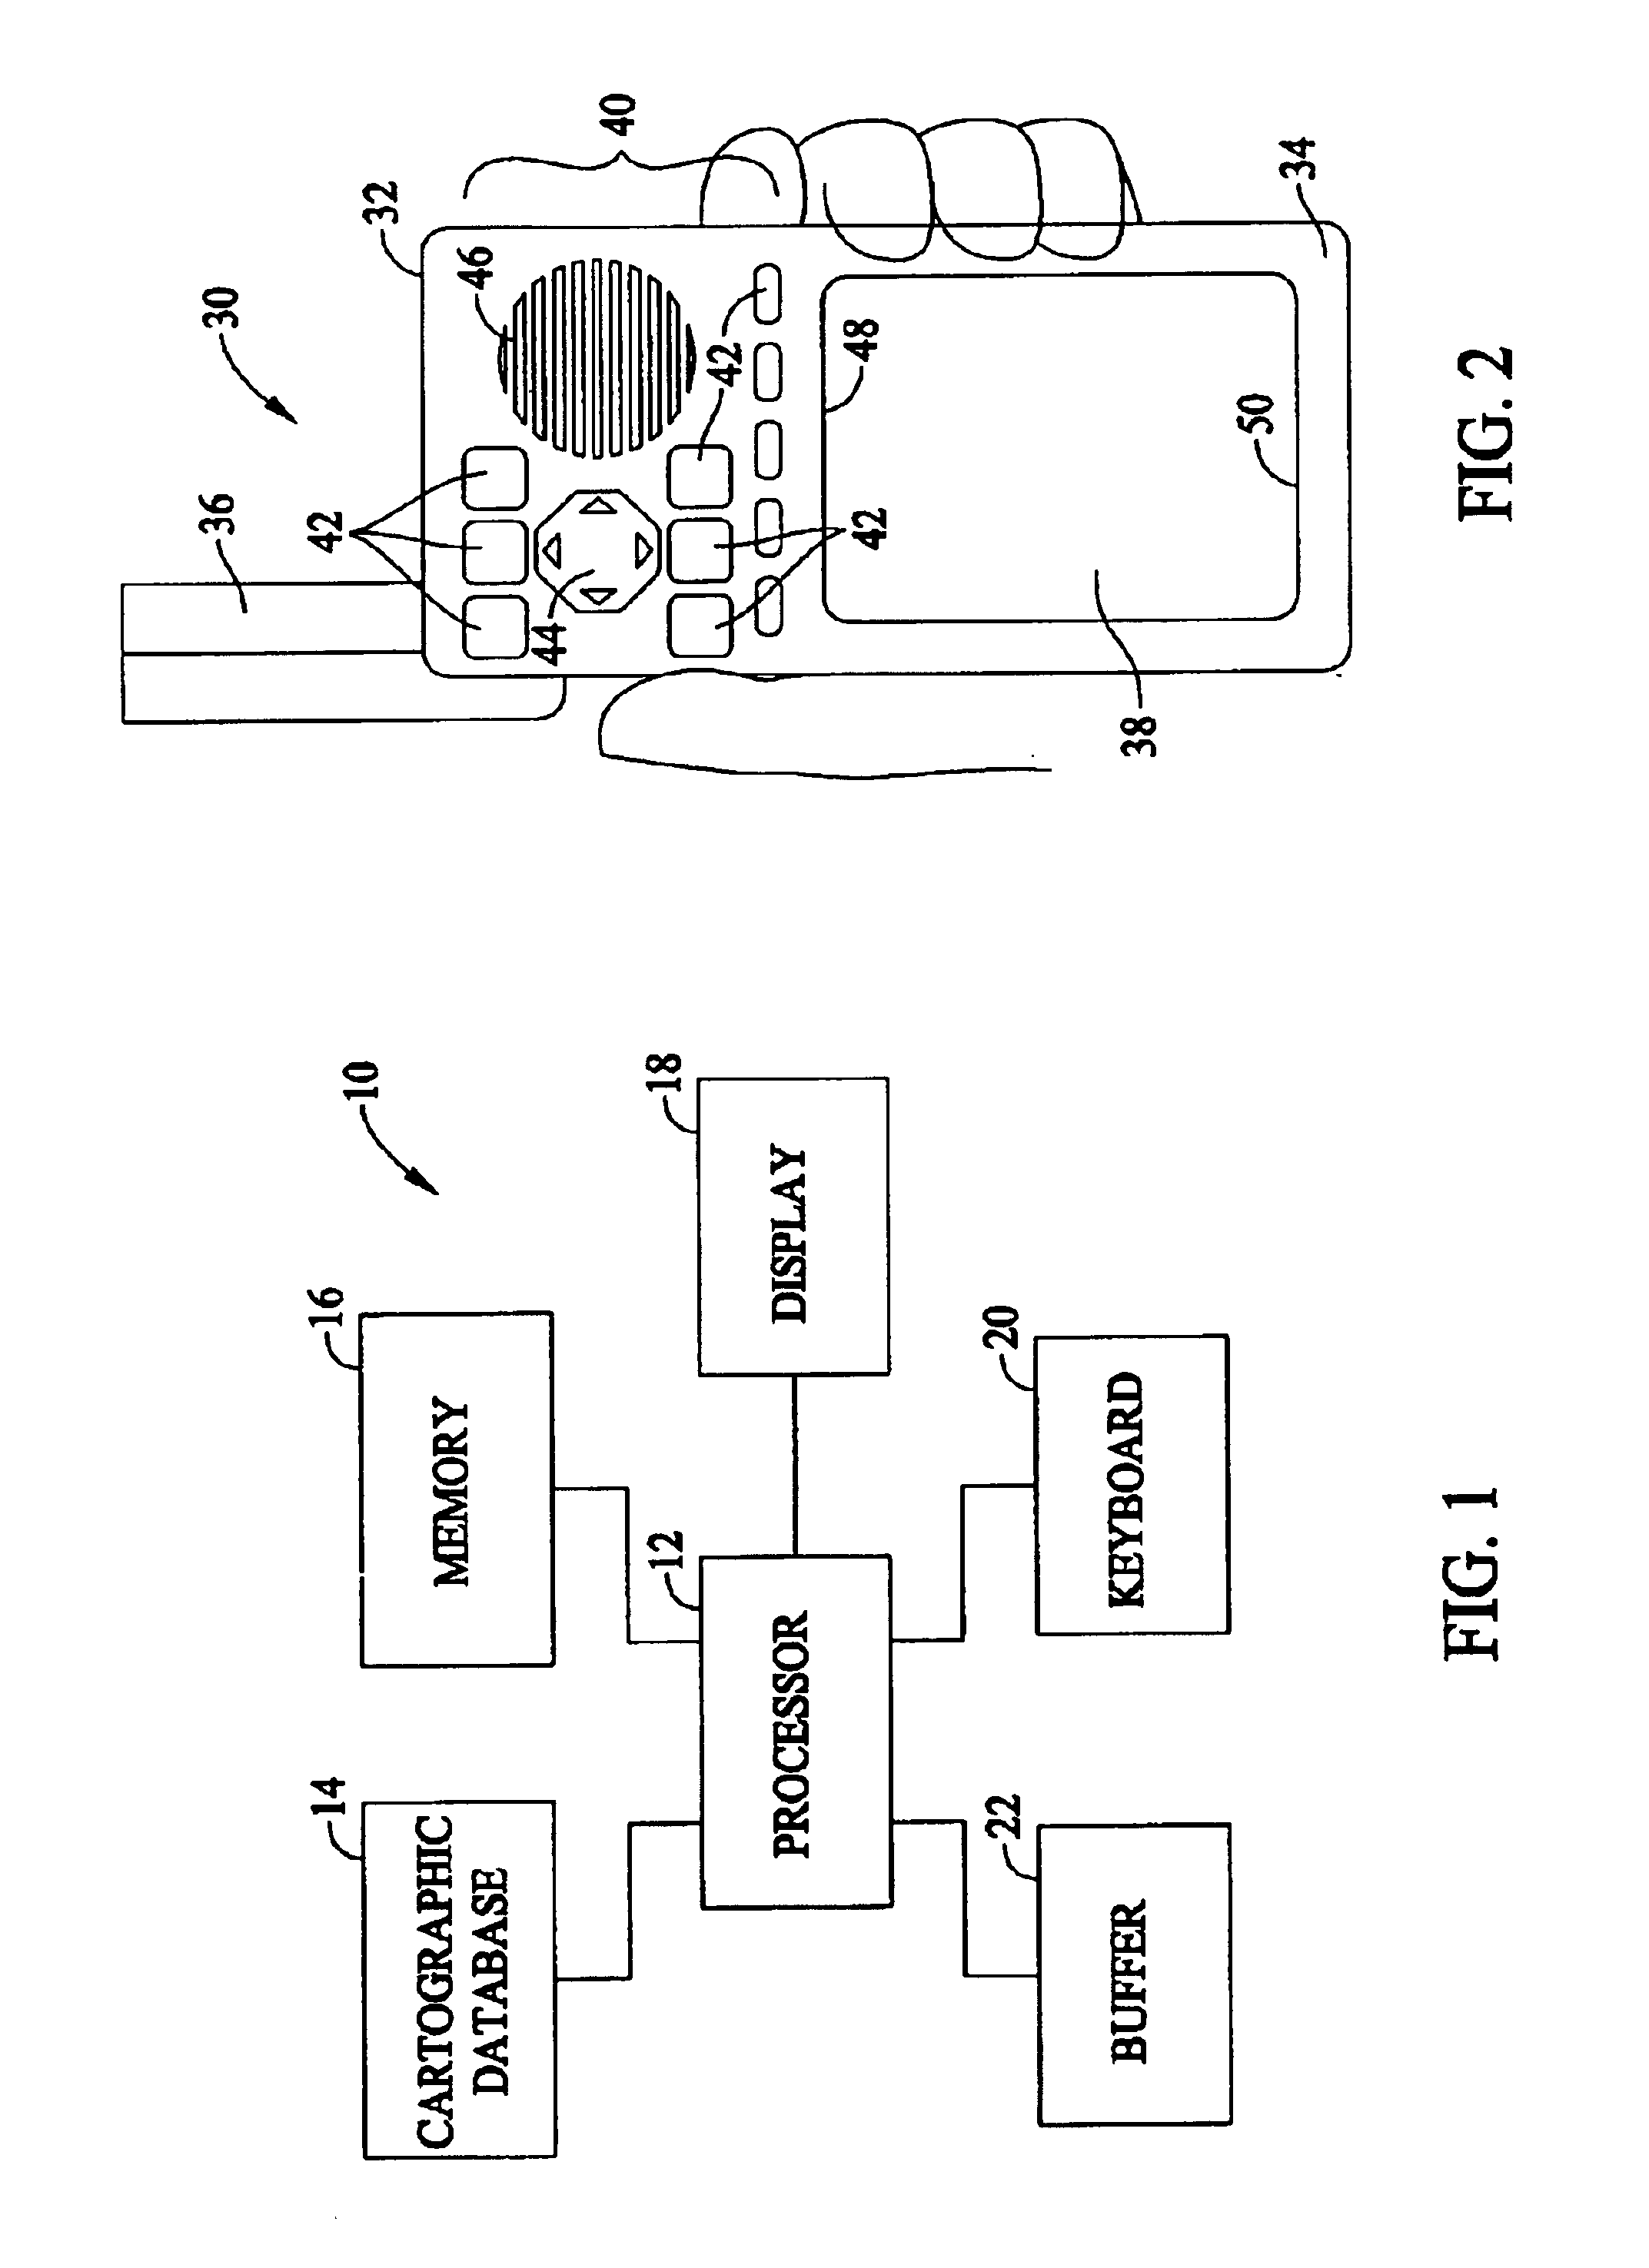 System and method for estimating impedance time through a road network